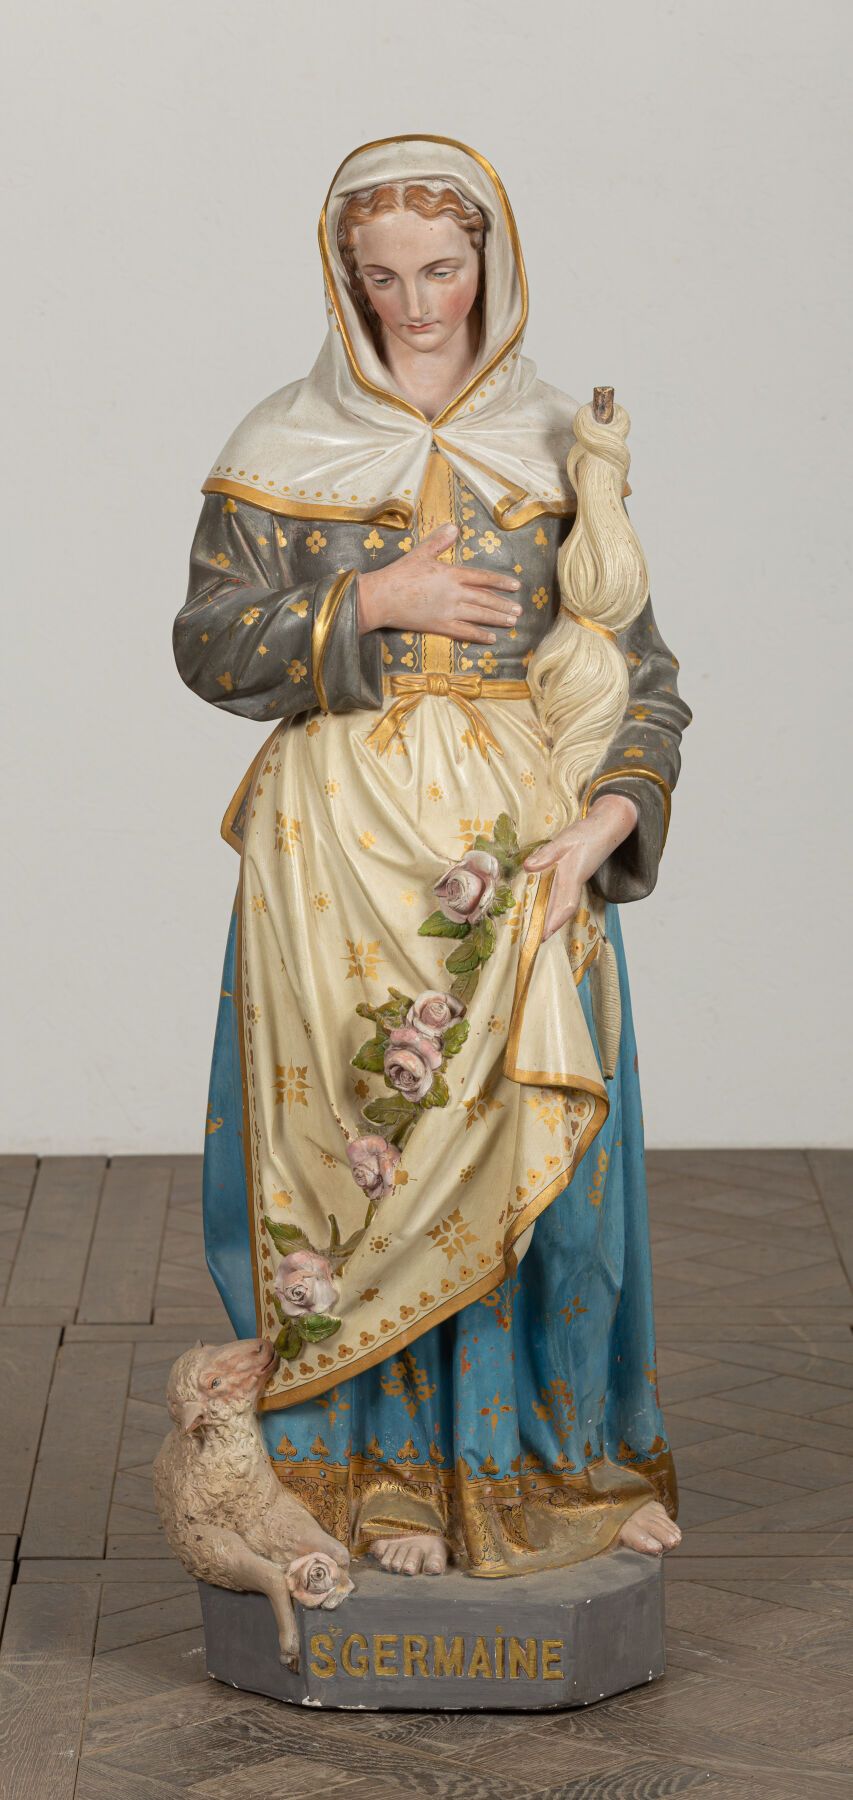 Null Saint Germaine in polychrome terracotta.
Her dress lets roses fall down to &hellip;